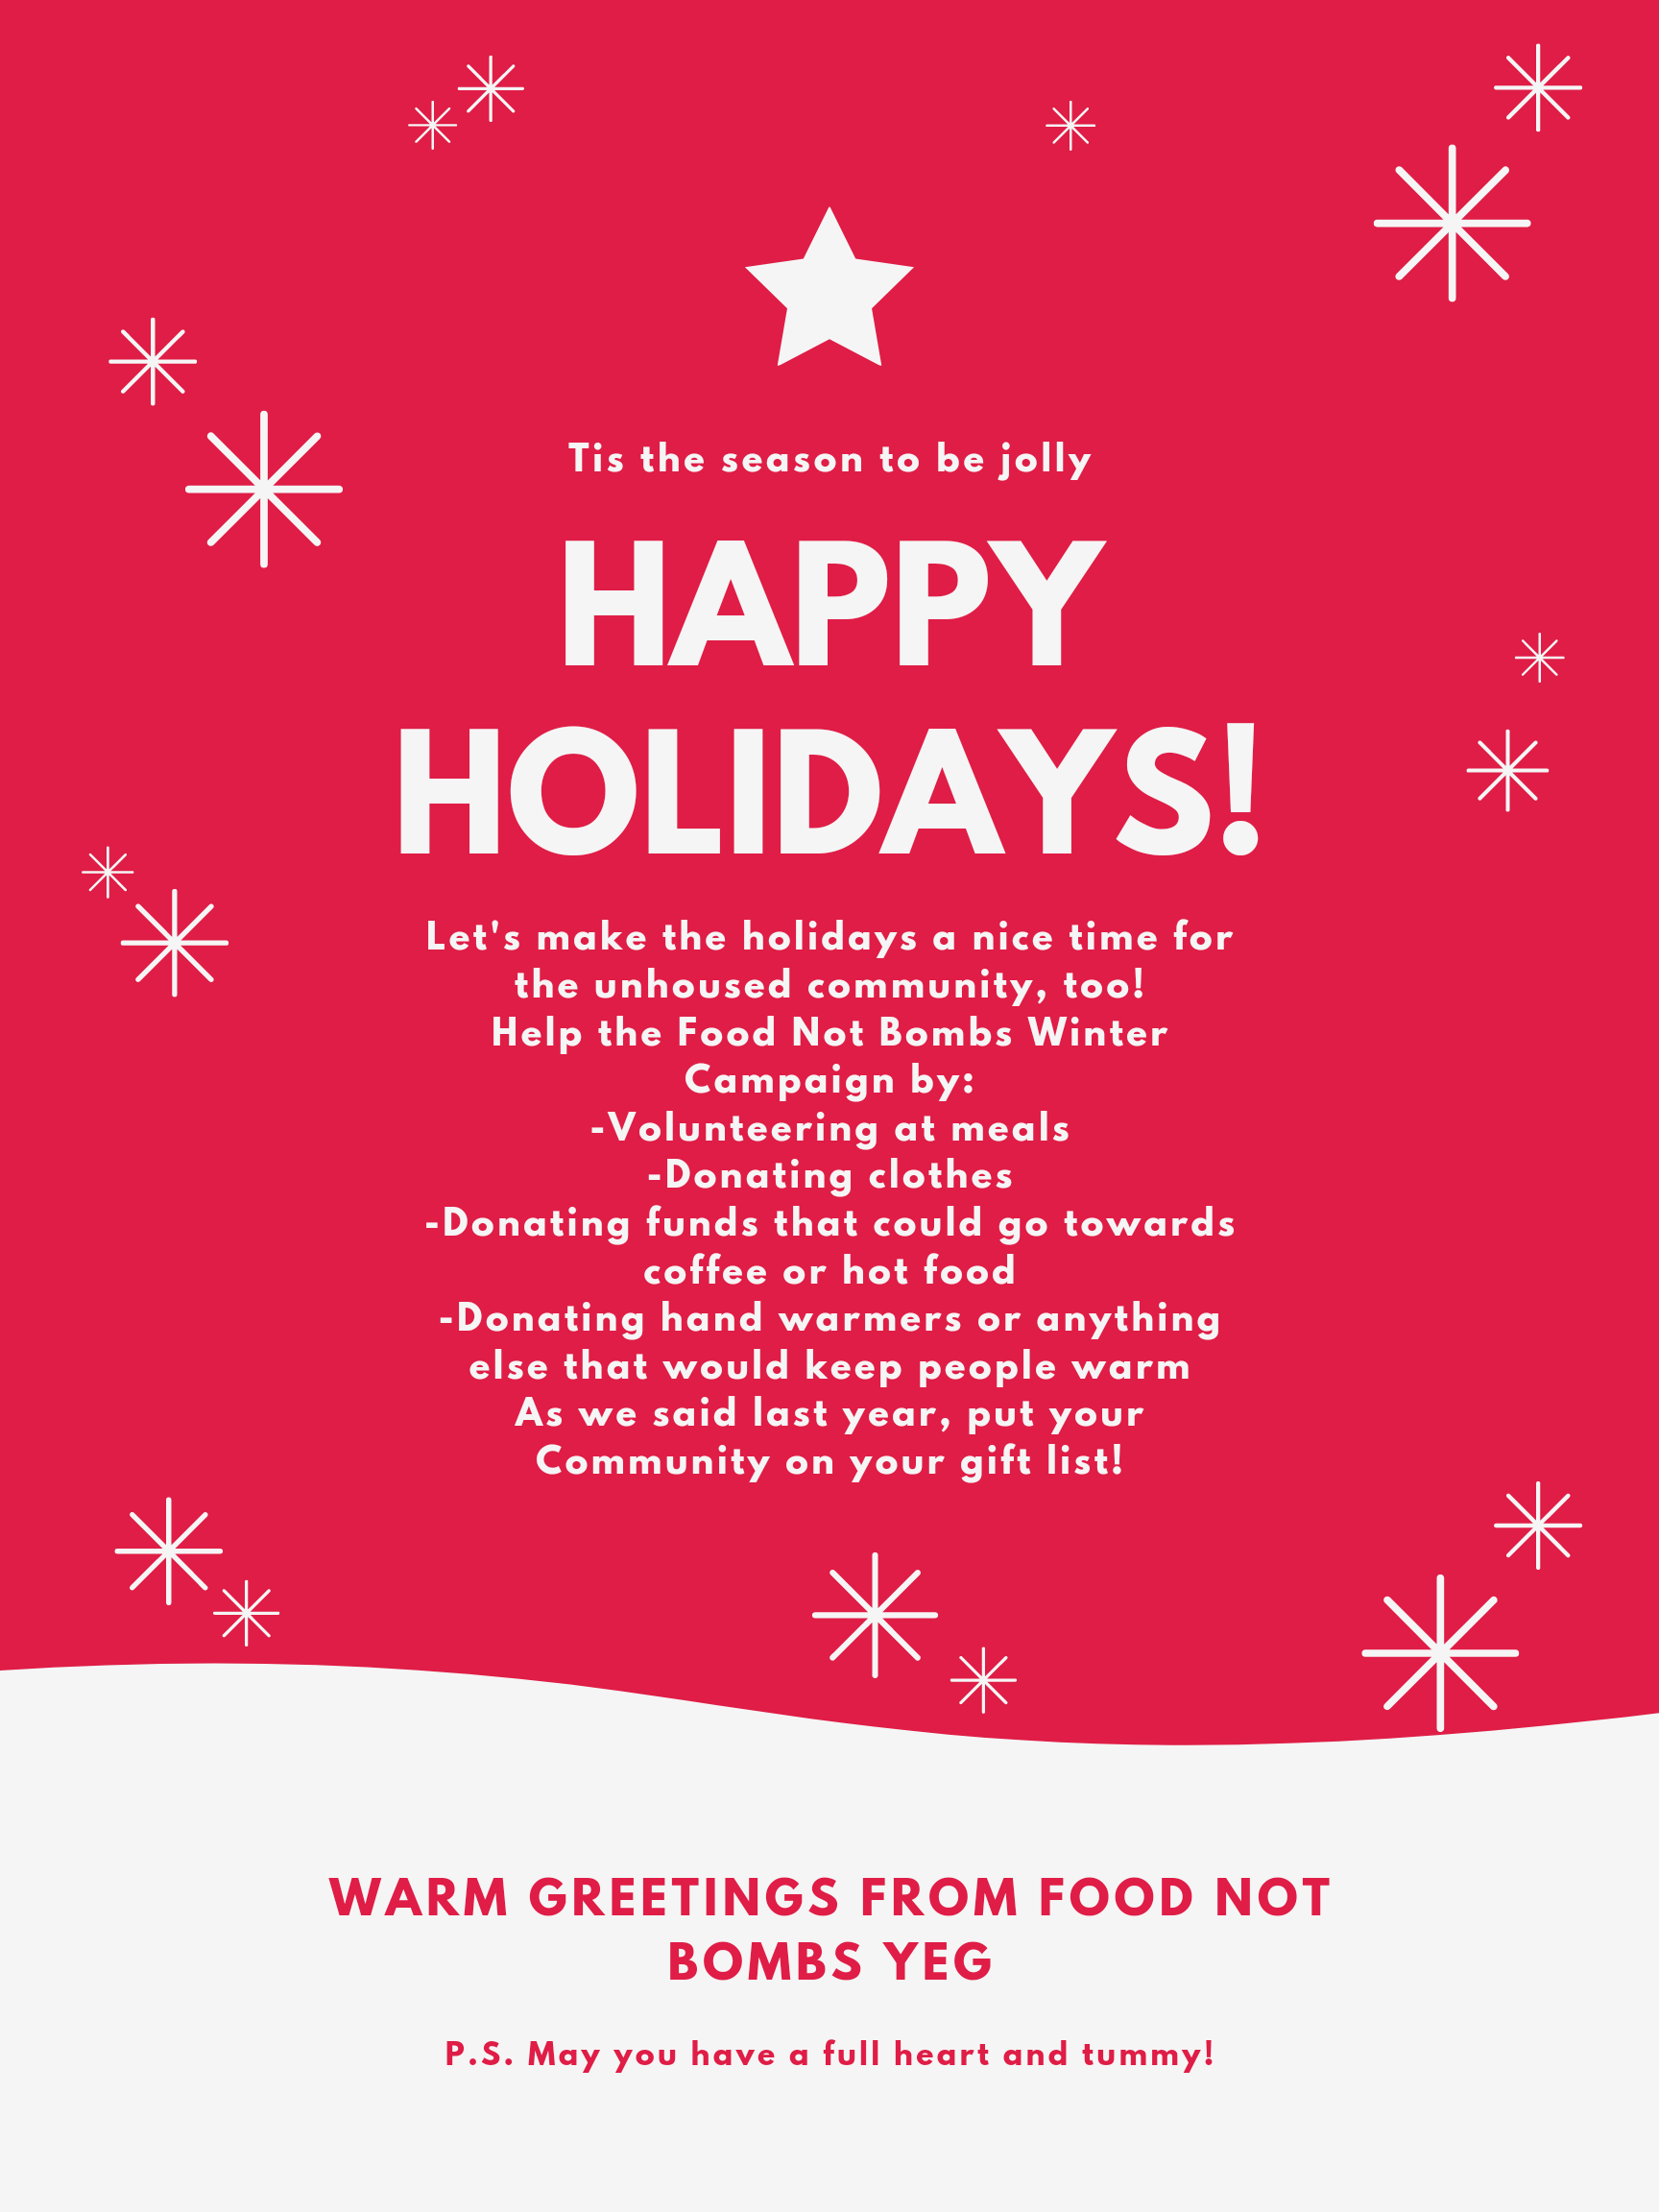 FNB Poster with the following text: Tis the season to be jolly. Happy Holidays. Let's make the holidays a nice time for the unhoused community, too! Help the Food Not Bombs Winter Campaign by: Volunteering at meals; Donating Clothes; Donating funds that could go towards coffee or hot food; Donating hand warmers or anything else that would keep people warm. As we said last year, put your Community on your gift list! Warm Greetings from Food Not Bombs YEG. P.S. May you have a full heart and tummy!.